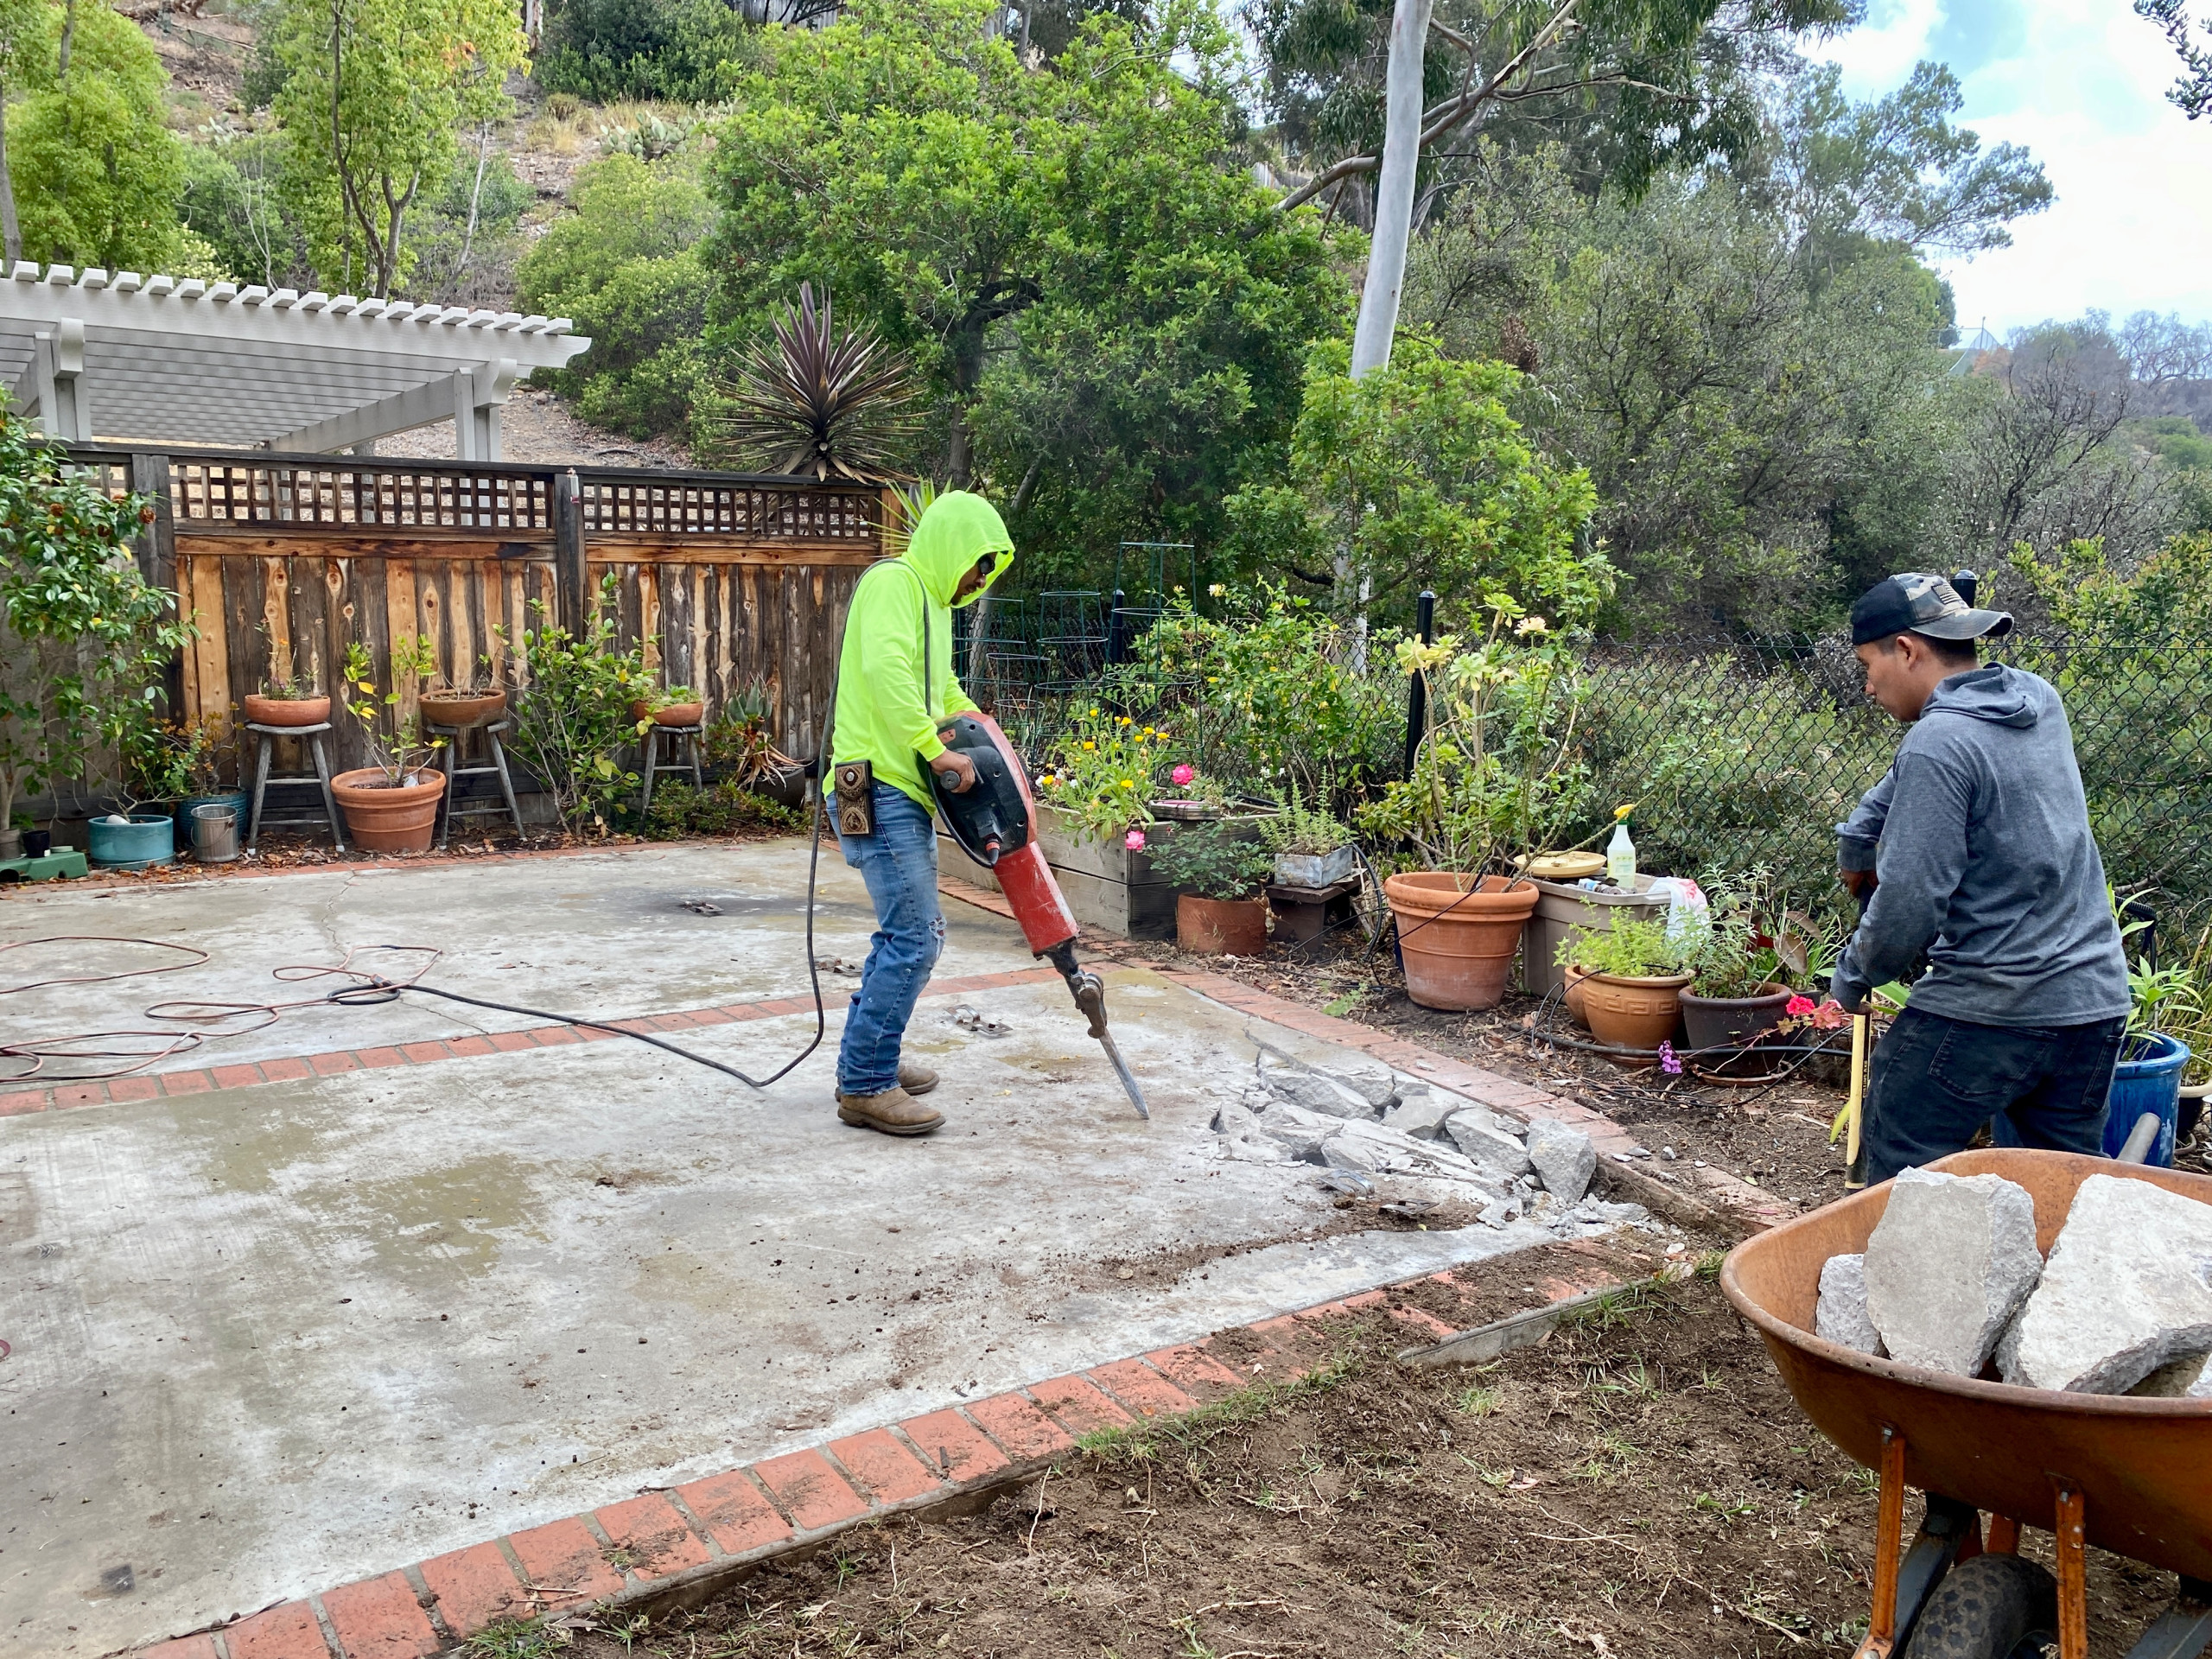 Demo on an Old Concrete Patio